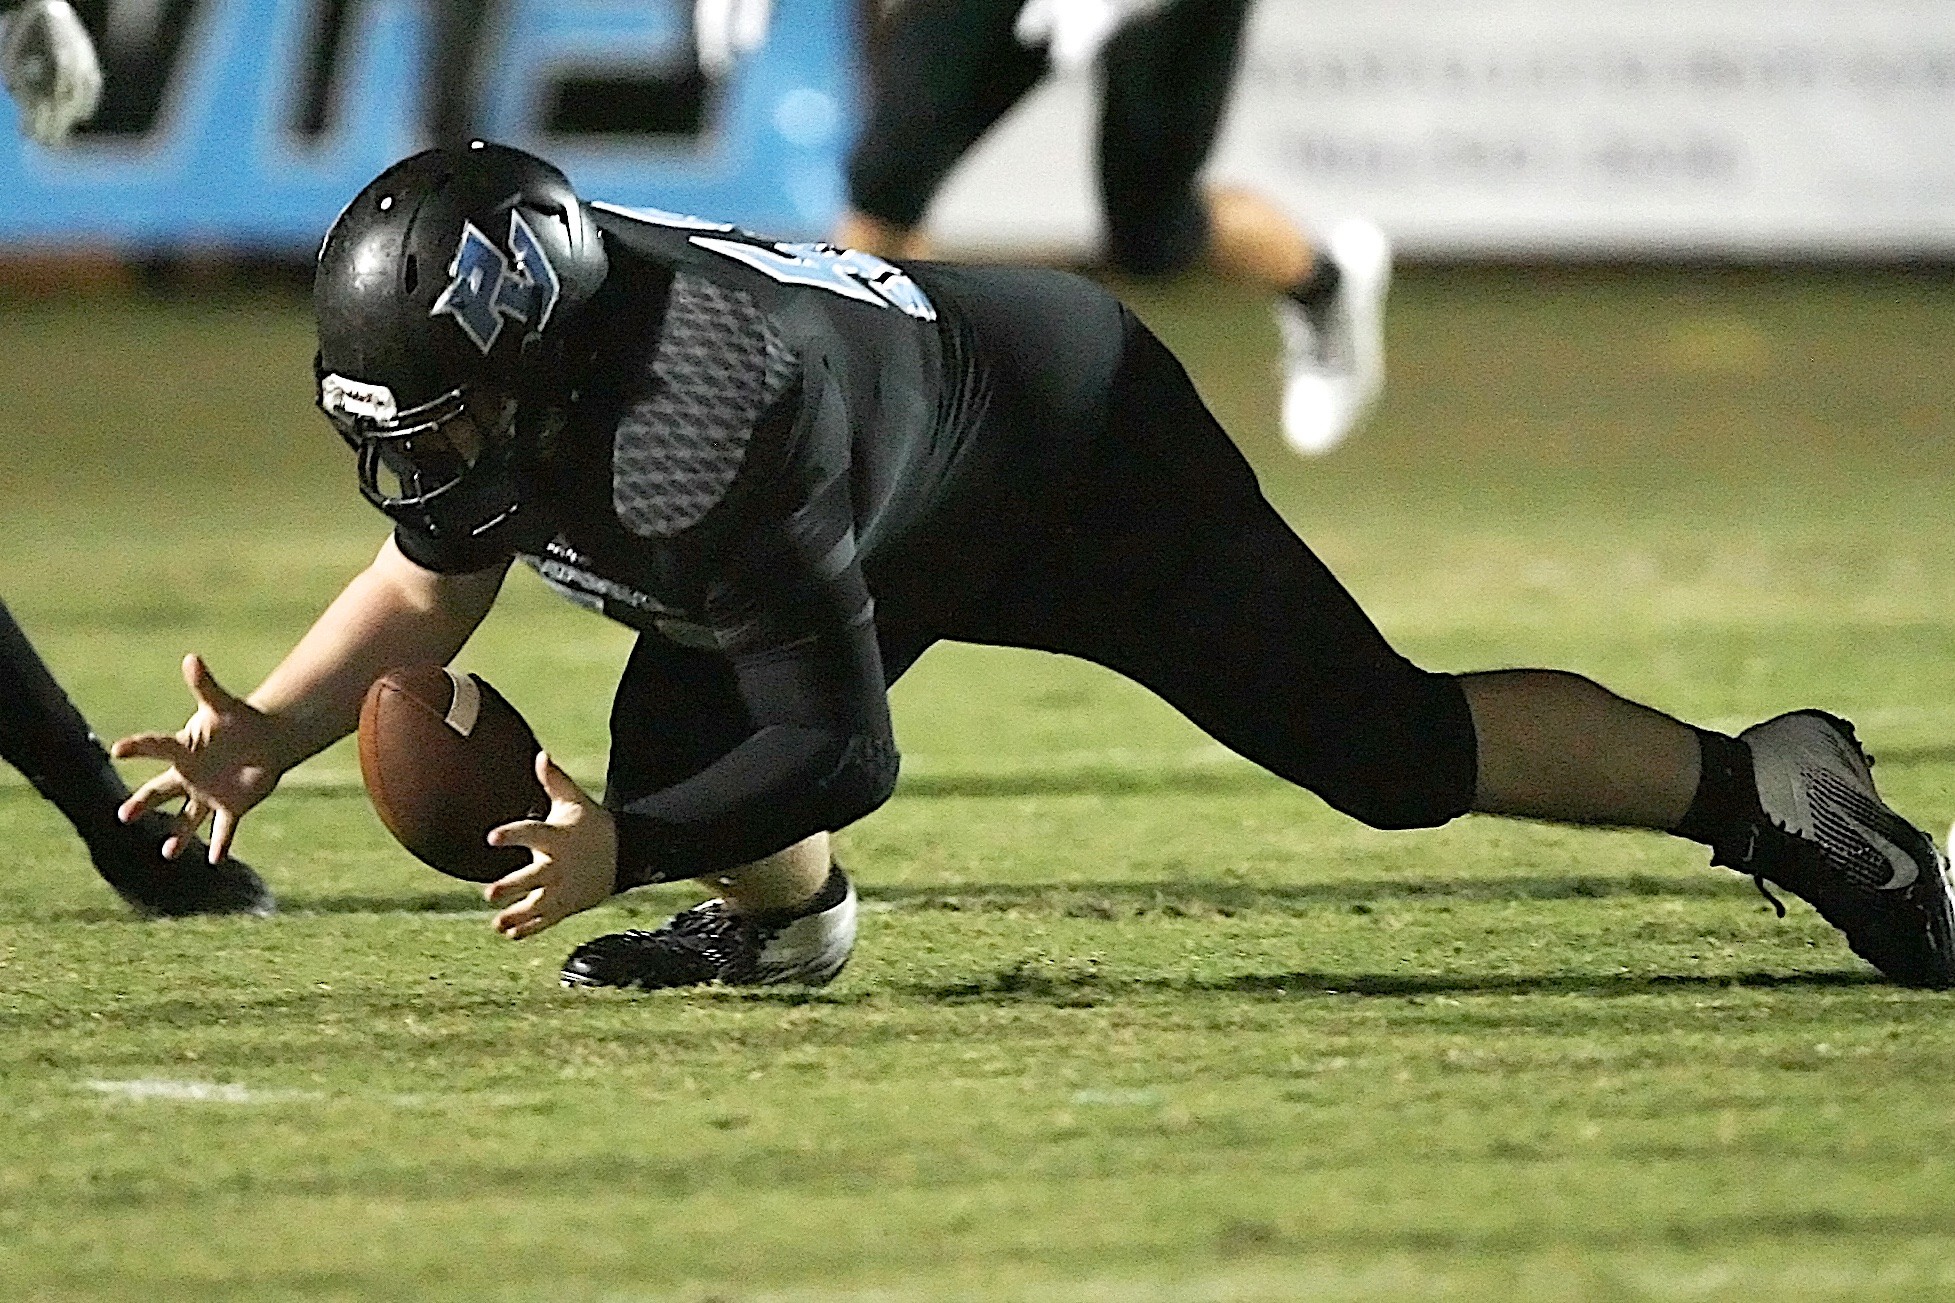 #50 Mike Duncan of the Sharks recovers a Knights’ fumble.